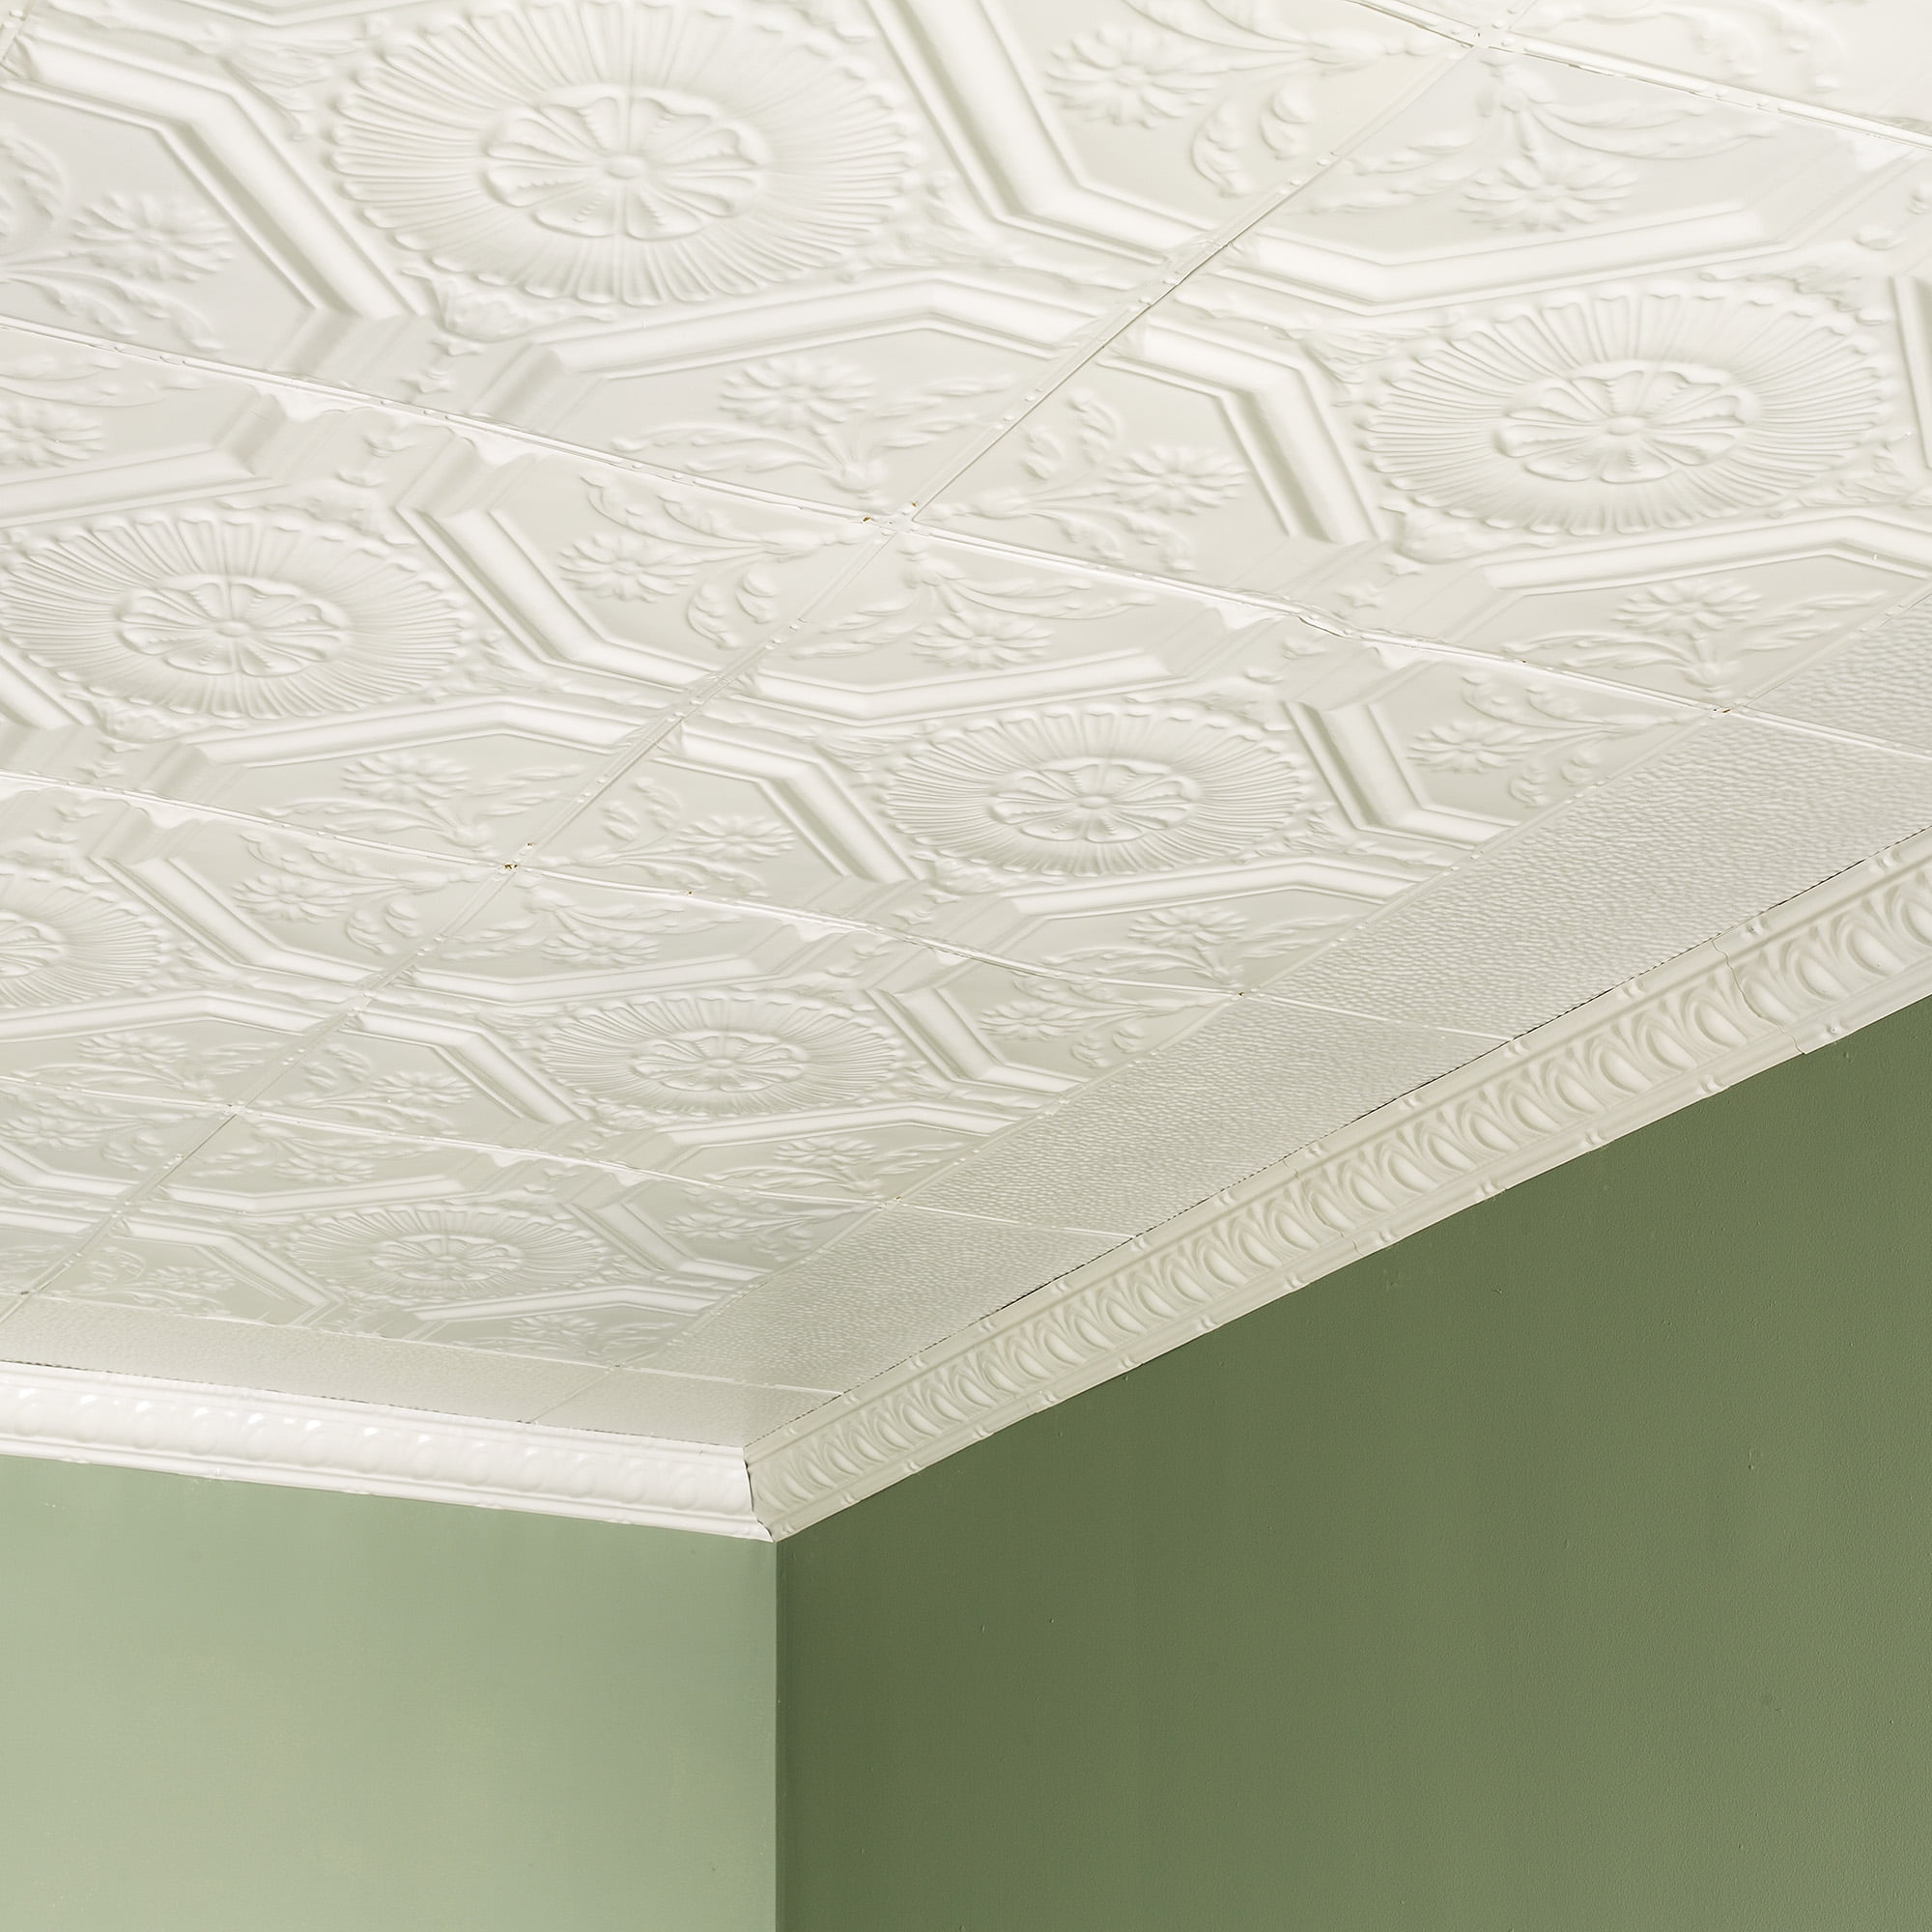 Great Lakes Tin Rochester Antique White Nail-Up Ceiling Tiles Easy to Install Package of Five 2ft x 2ft Panels Choose from 11 Styles Perfect for DIY and Home Renovation Projects